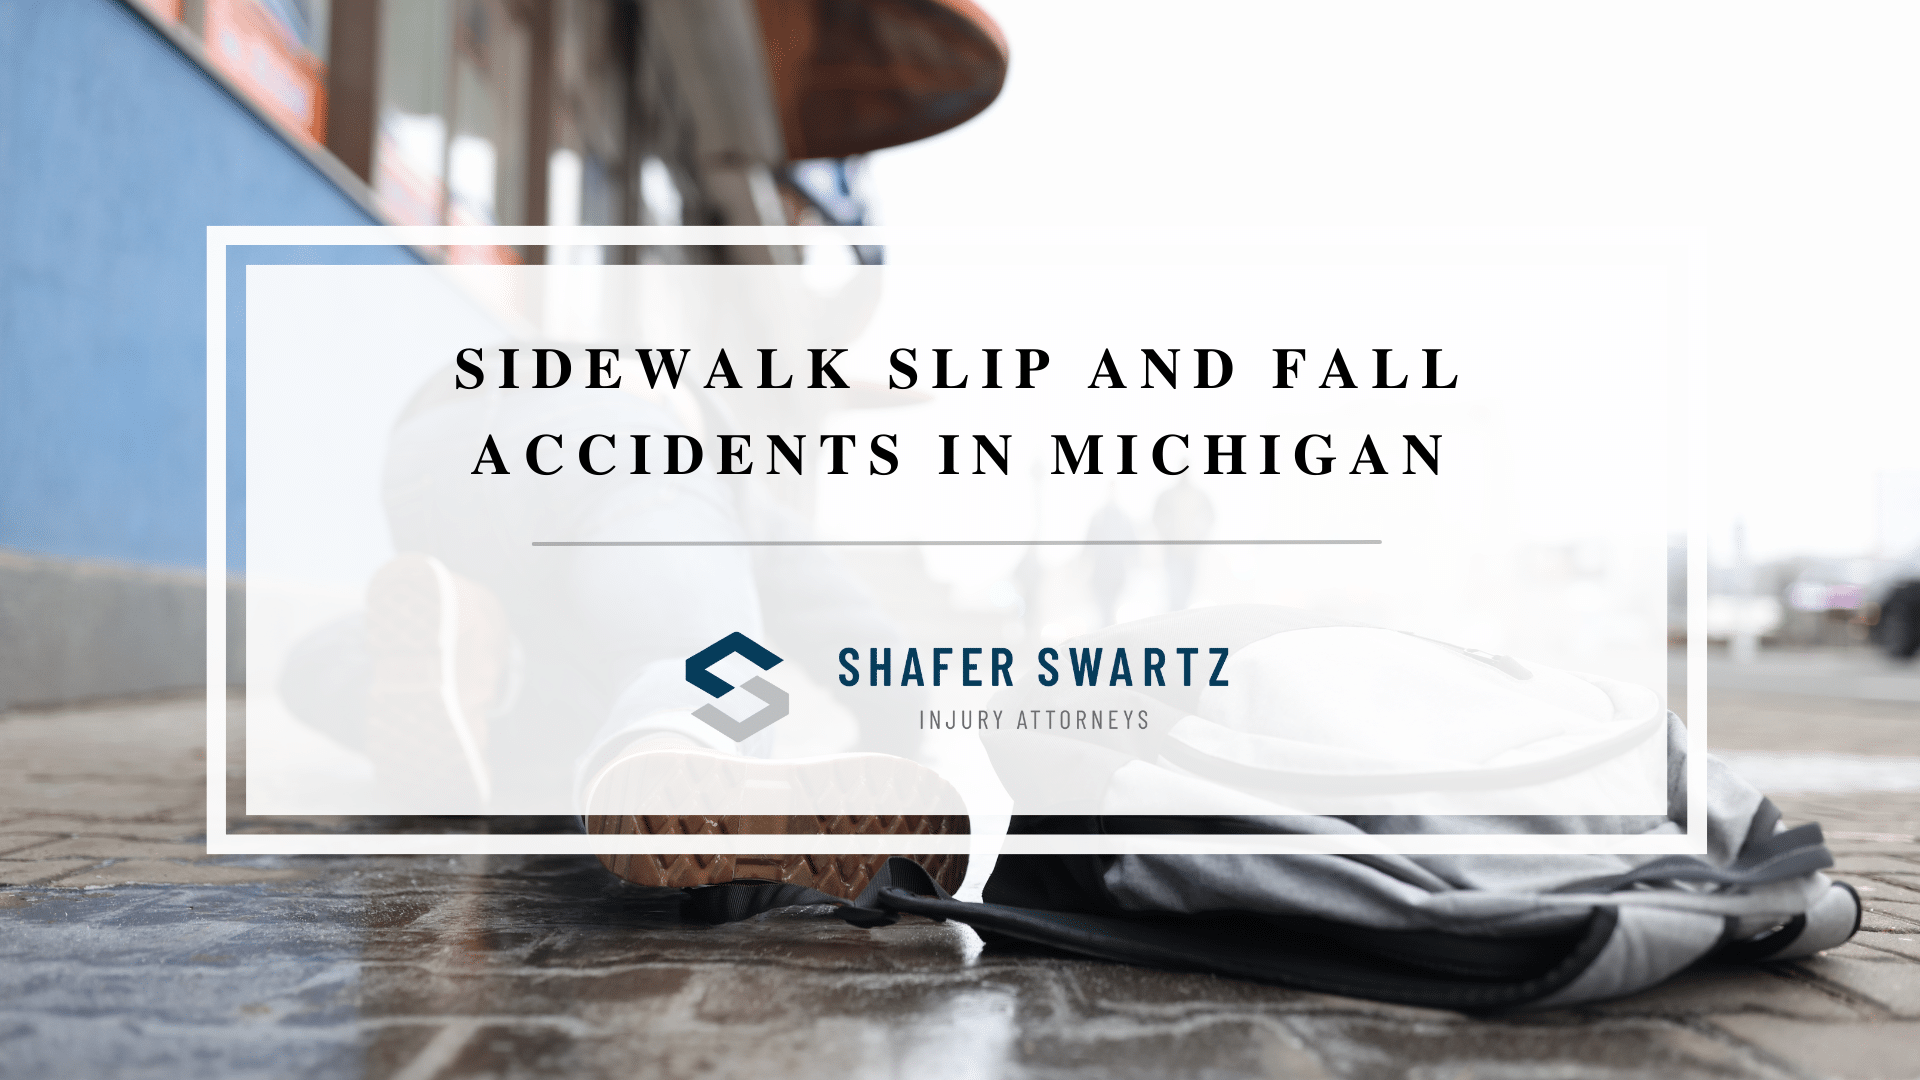 Featured image of sidewalk slip and fall accidents in michigan